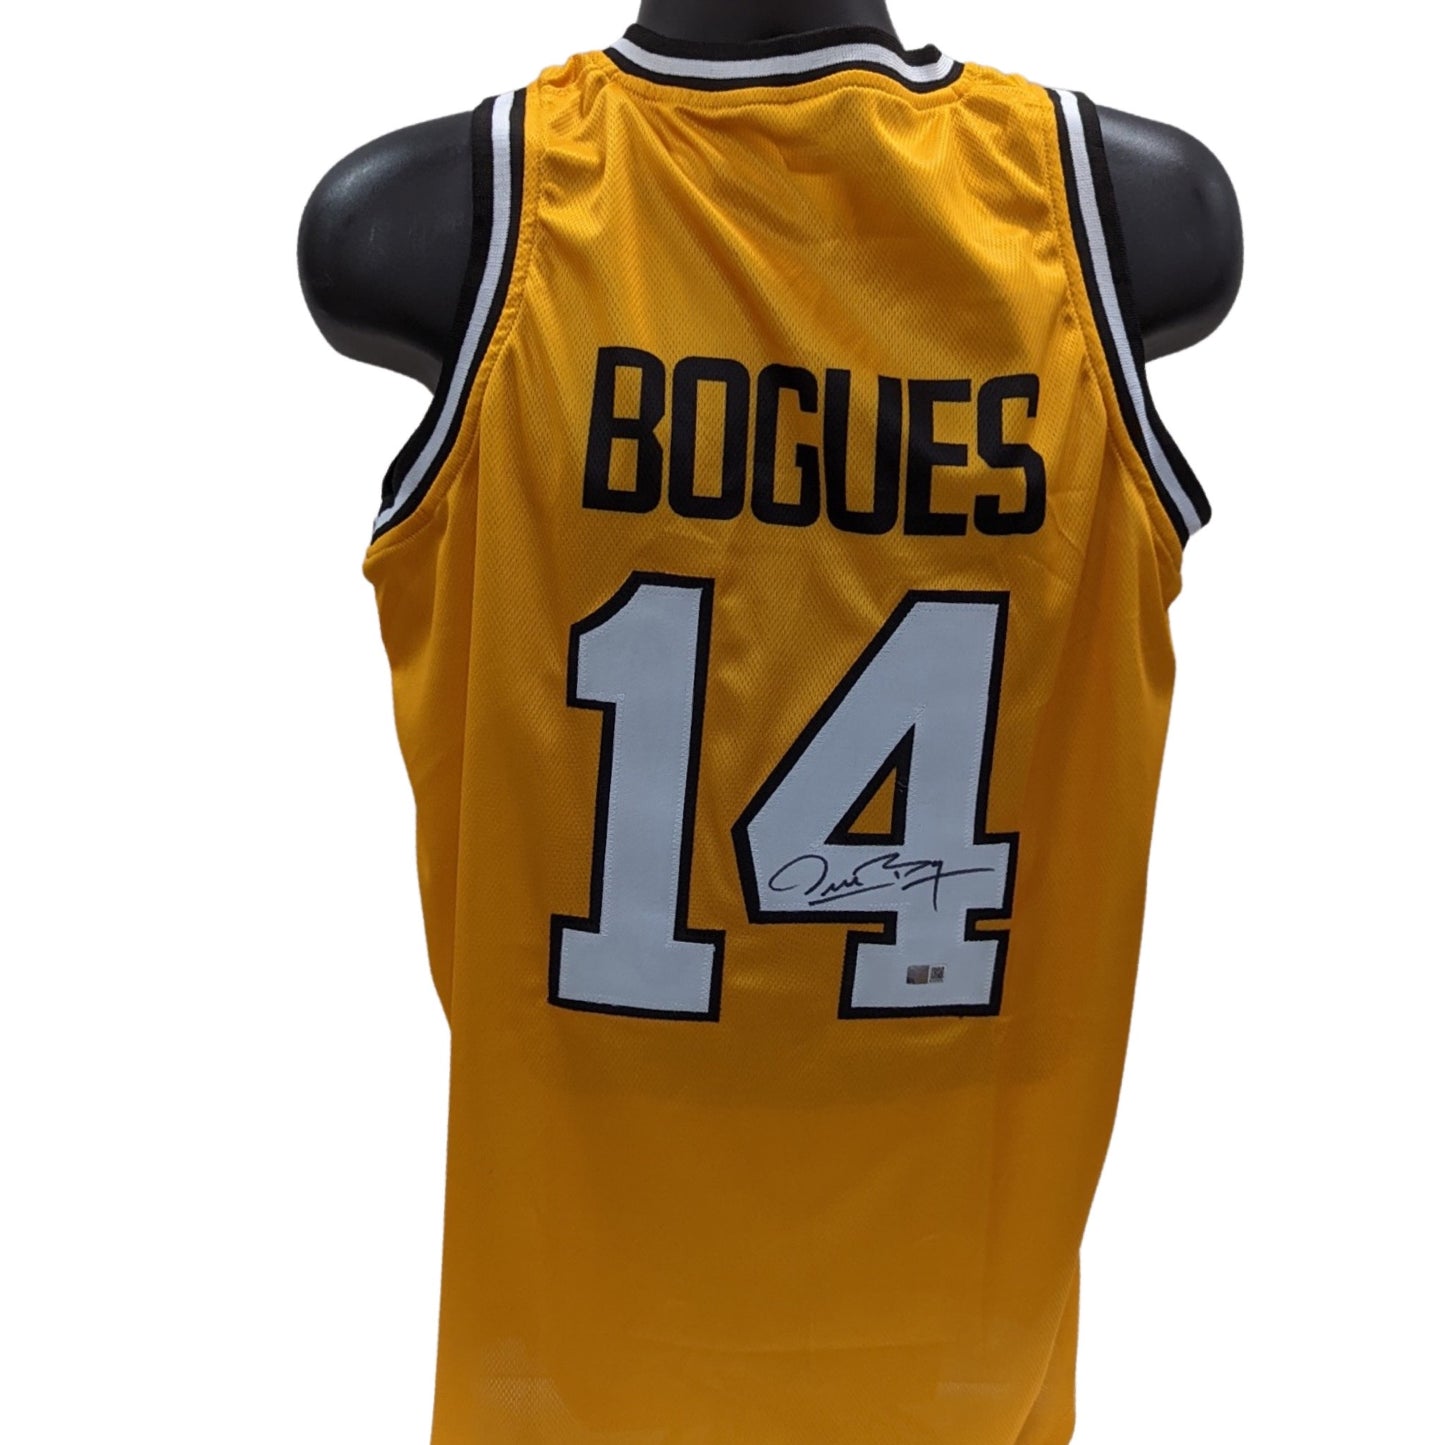 Muggsy Bogues Autographed Wake Forest Jersey Steiner CX